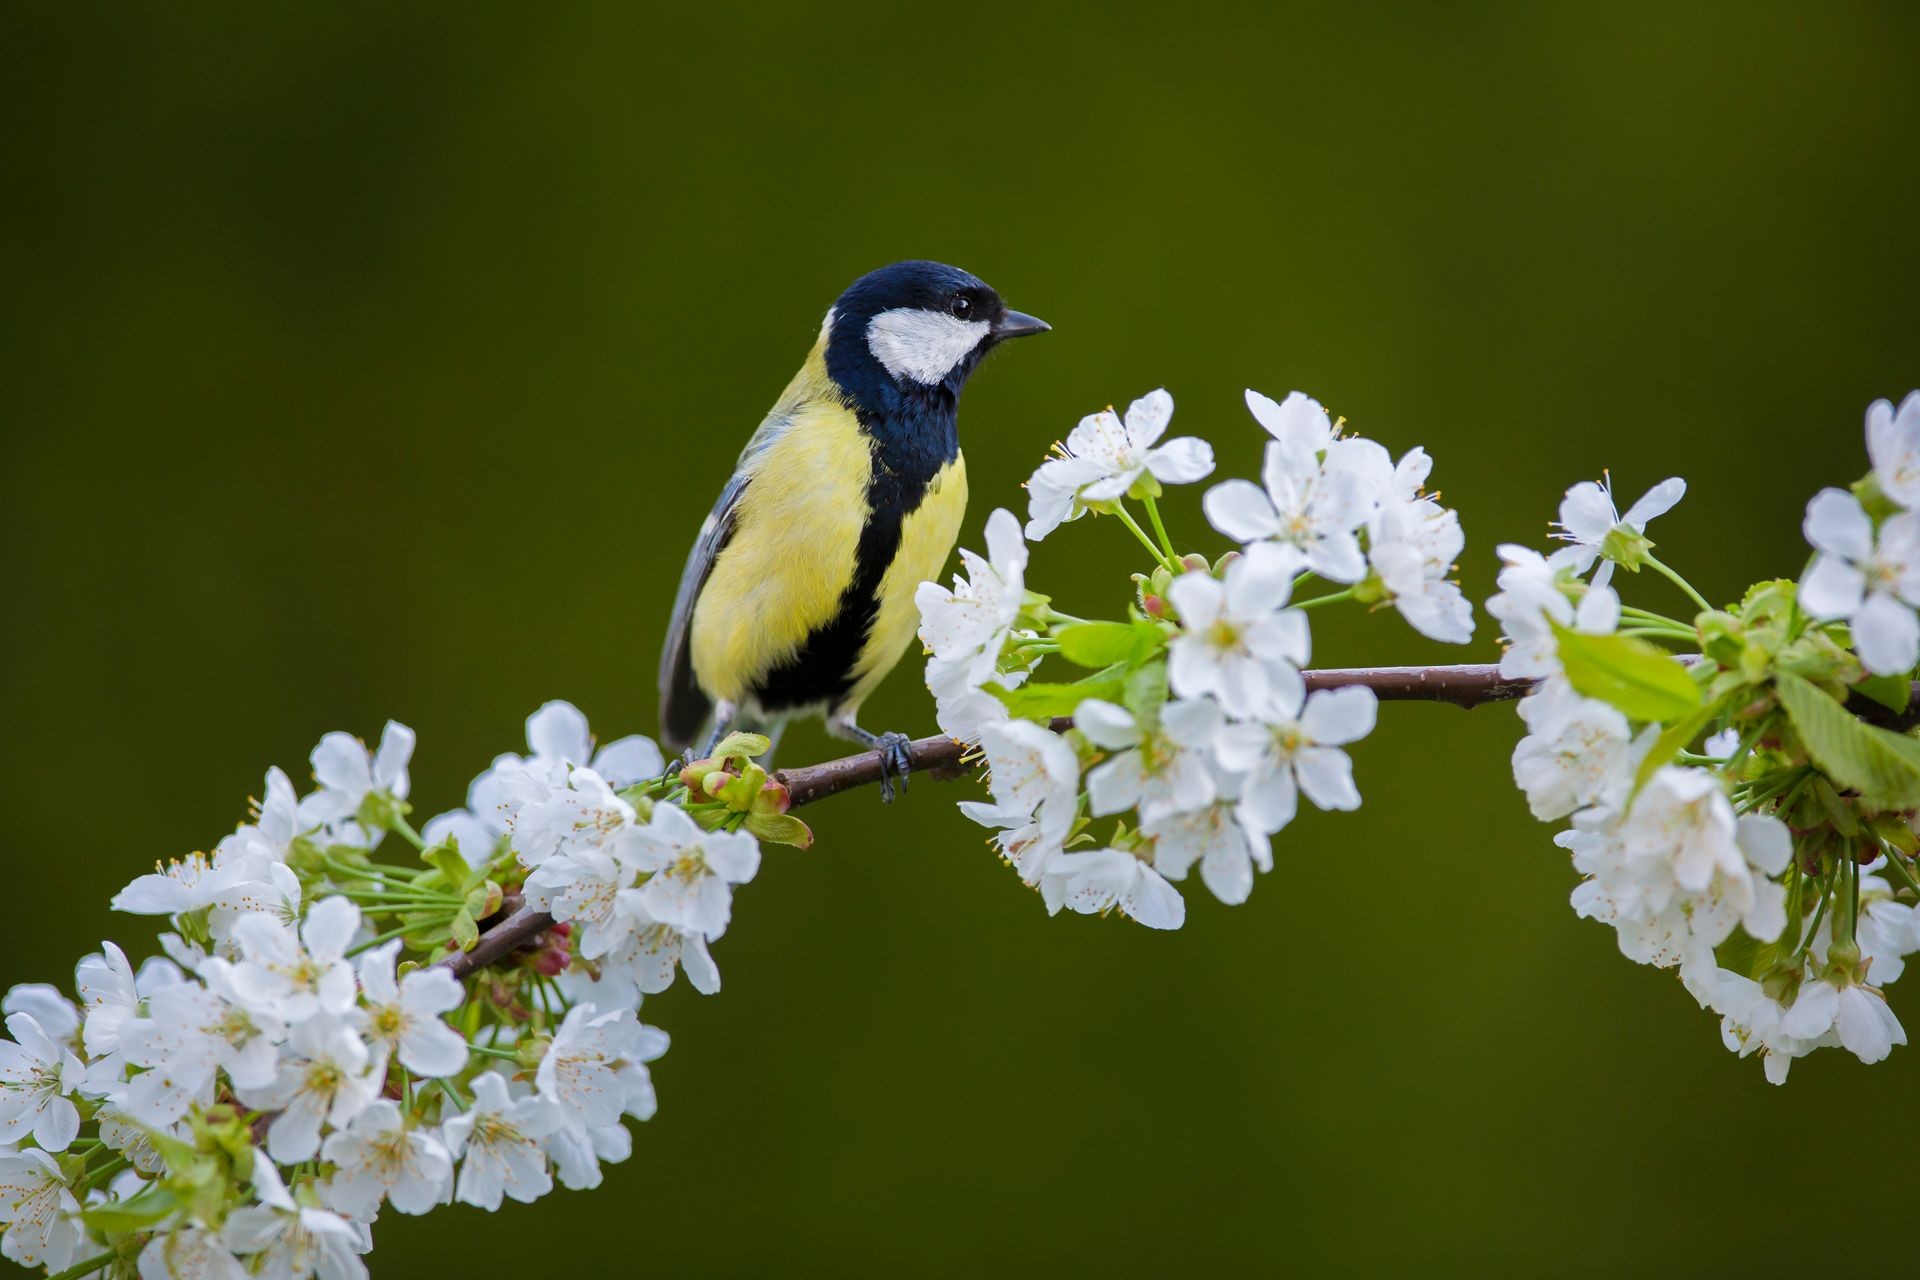 Great Tit (Parus major) perched on a blossoming branch